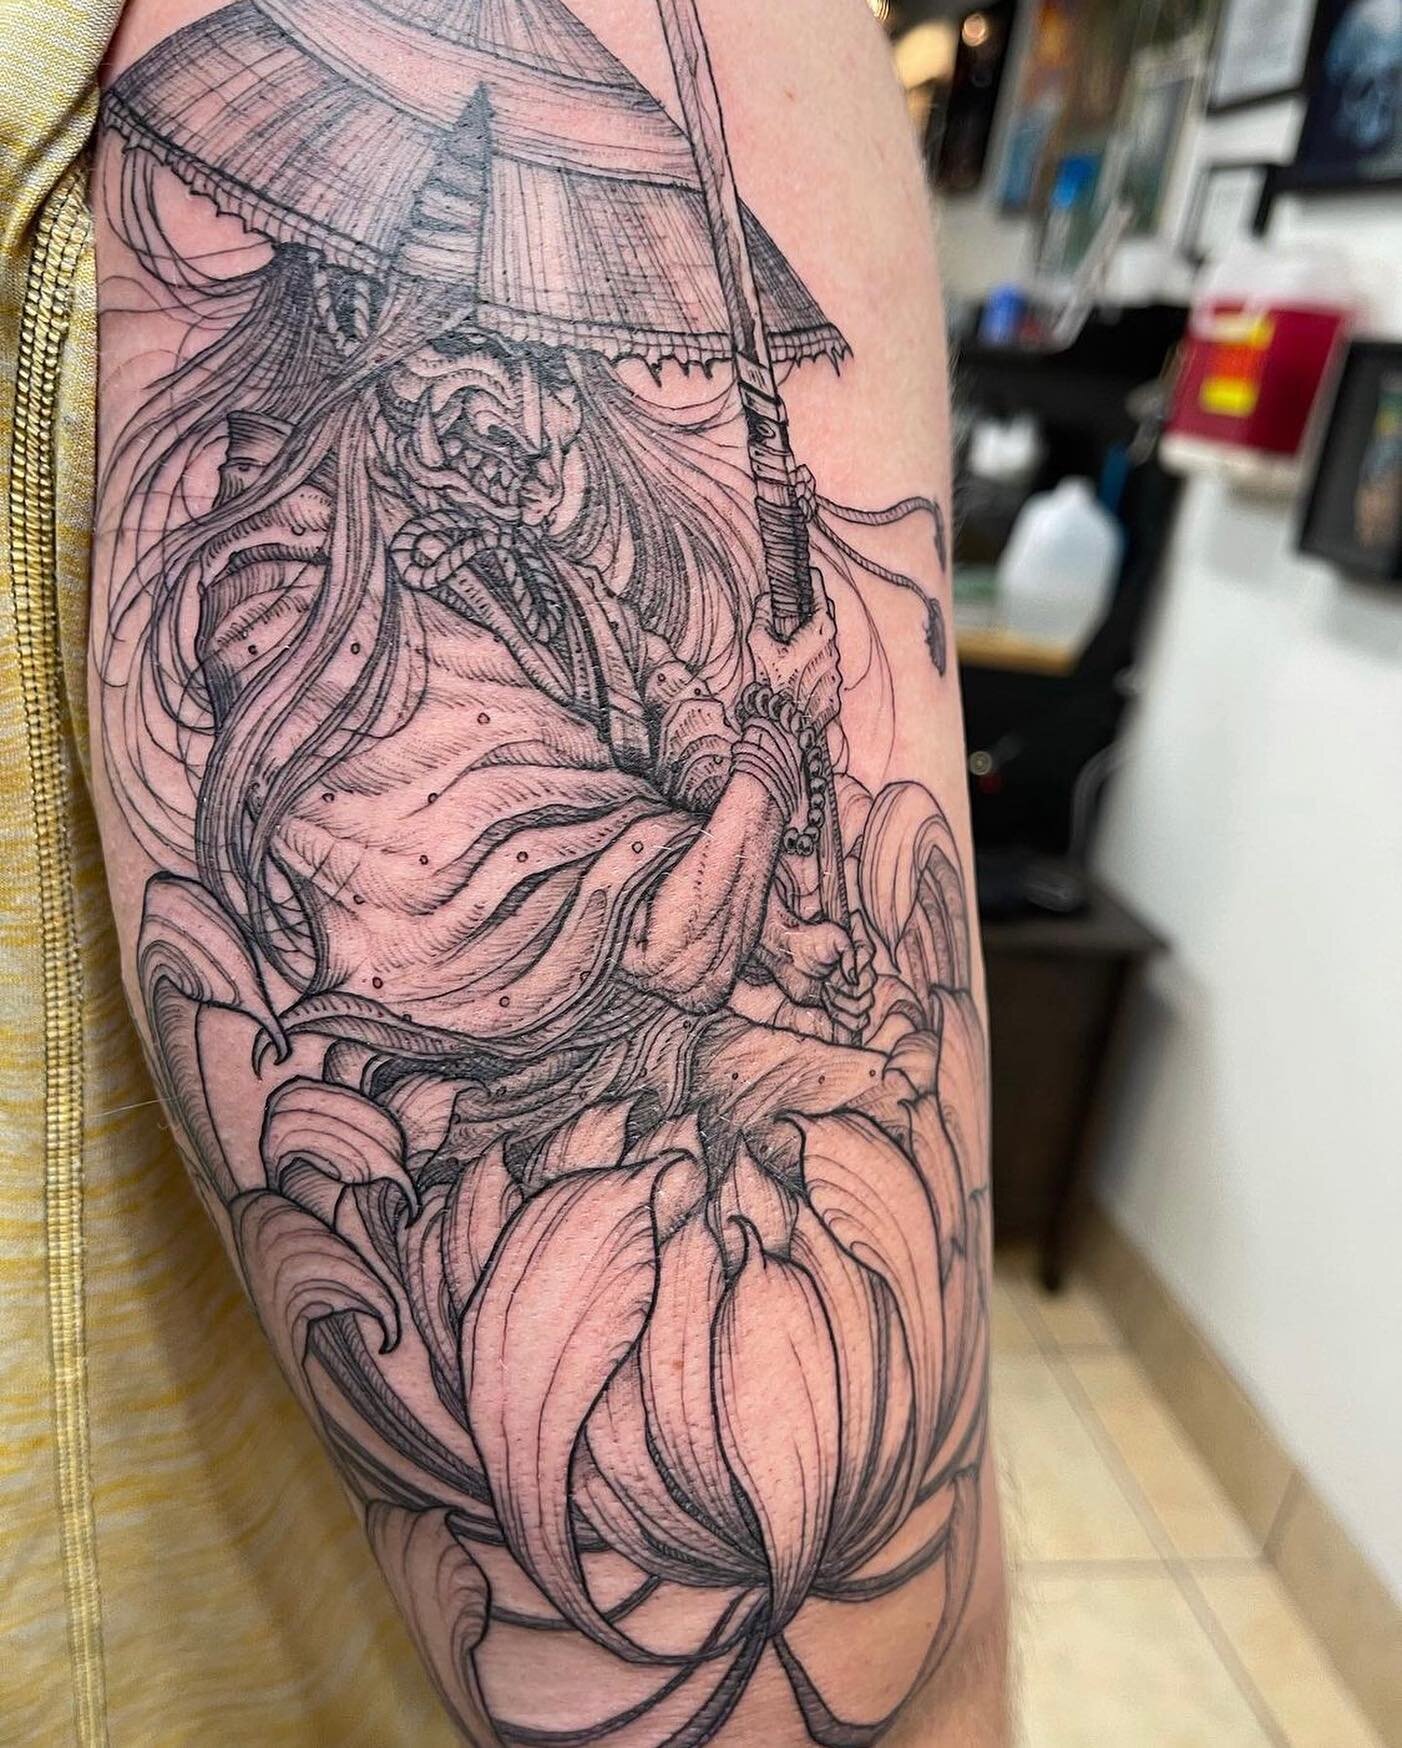 Check out these amazing details by @automaticaaron 
.
.
.
#lineworktattoo #lineart #linework #details #blackwork #blackworktattoo #japanesetattoo #samuraitattoo #samurai #tattoo #tattoos #art #artistsoninstagram #artofinstagram #mn #mntattooartist #m